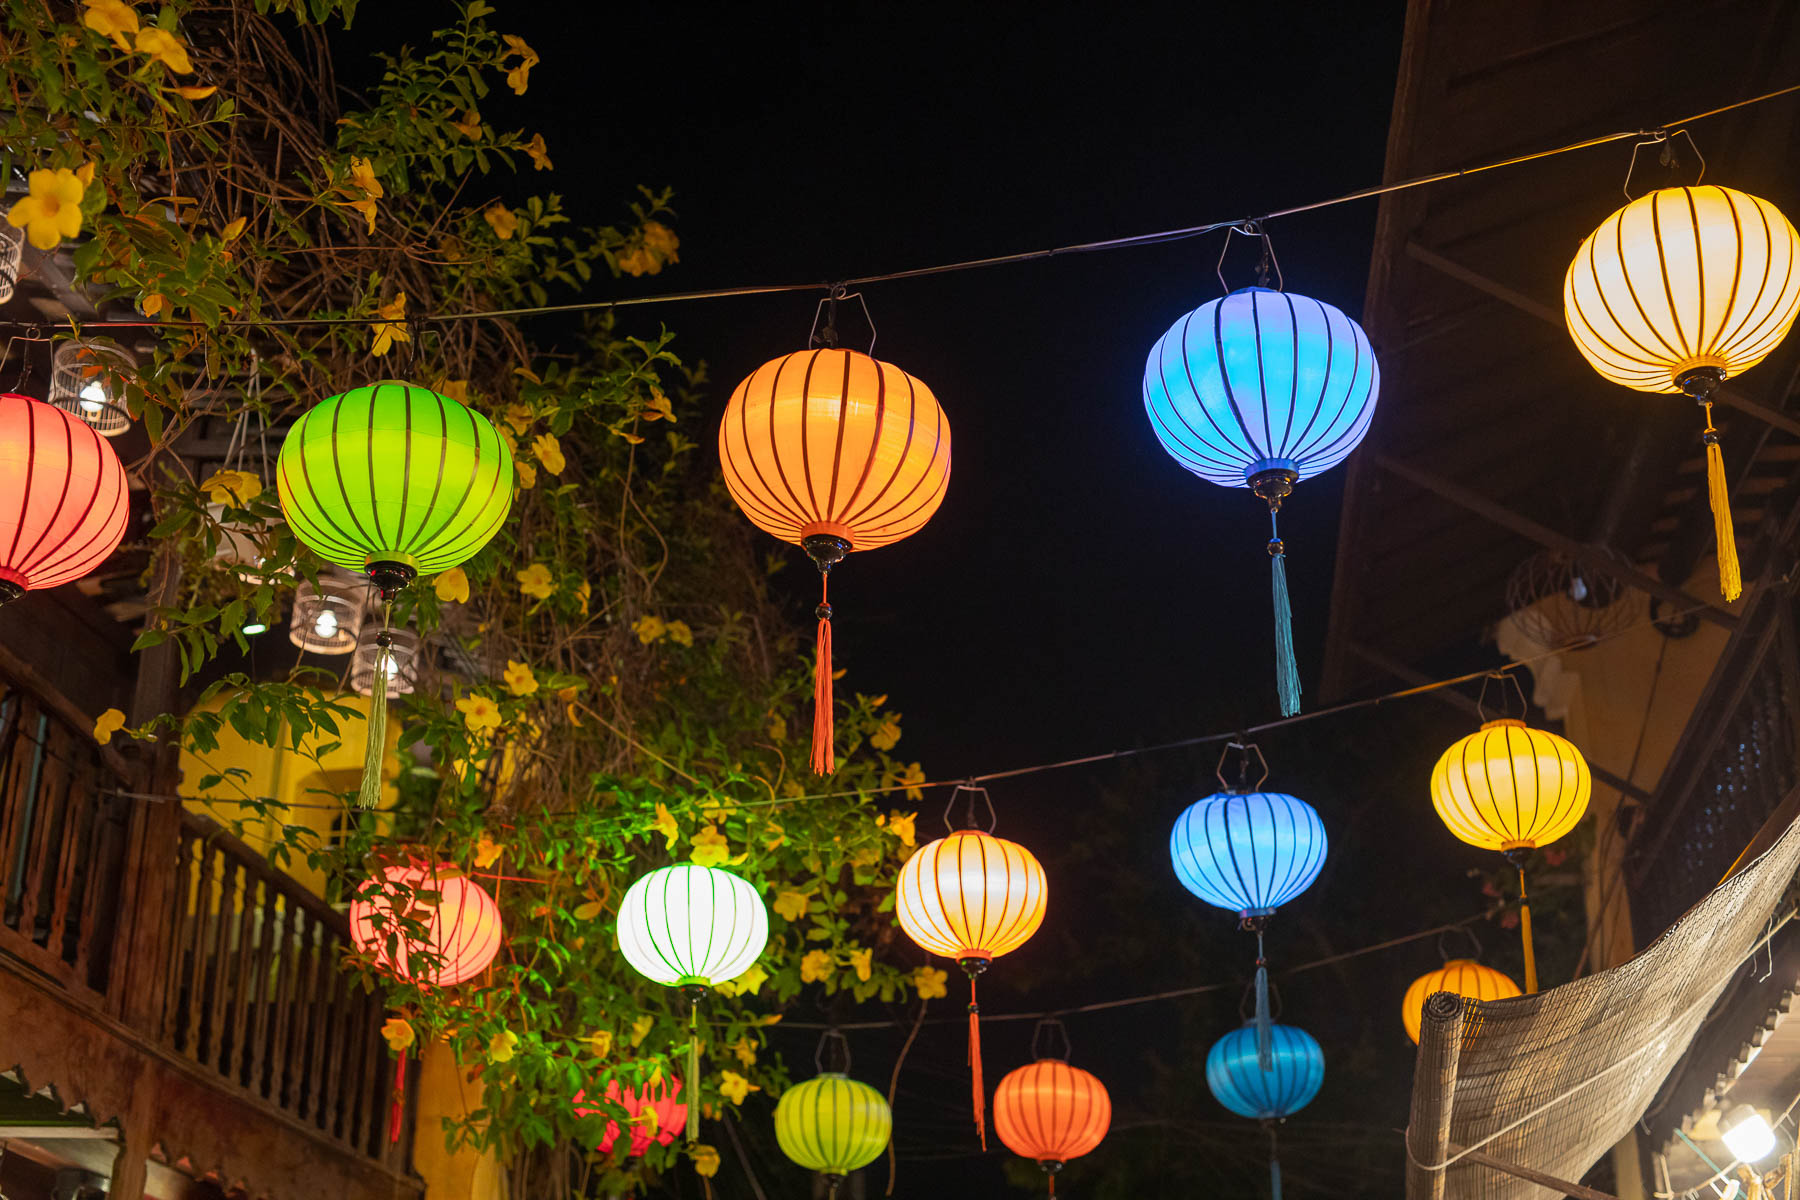 Hoi An is one of the best places to join the Mid-autumn Festival in Vietnam